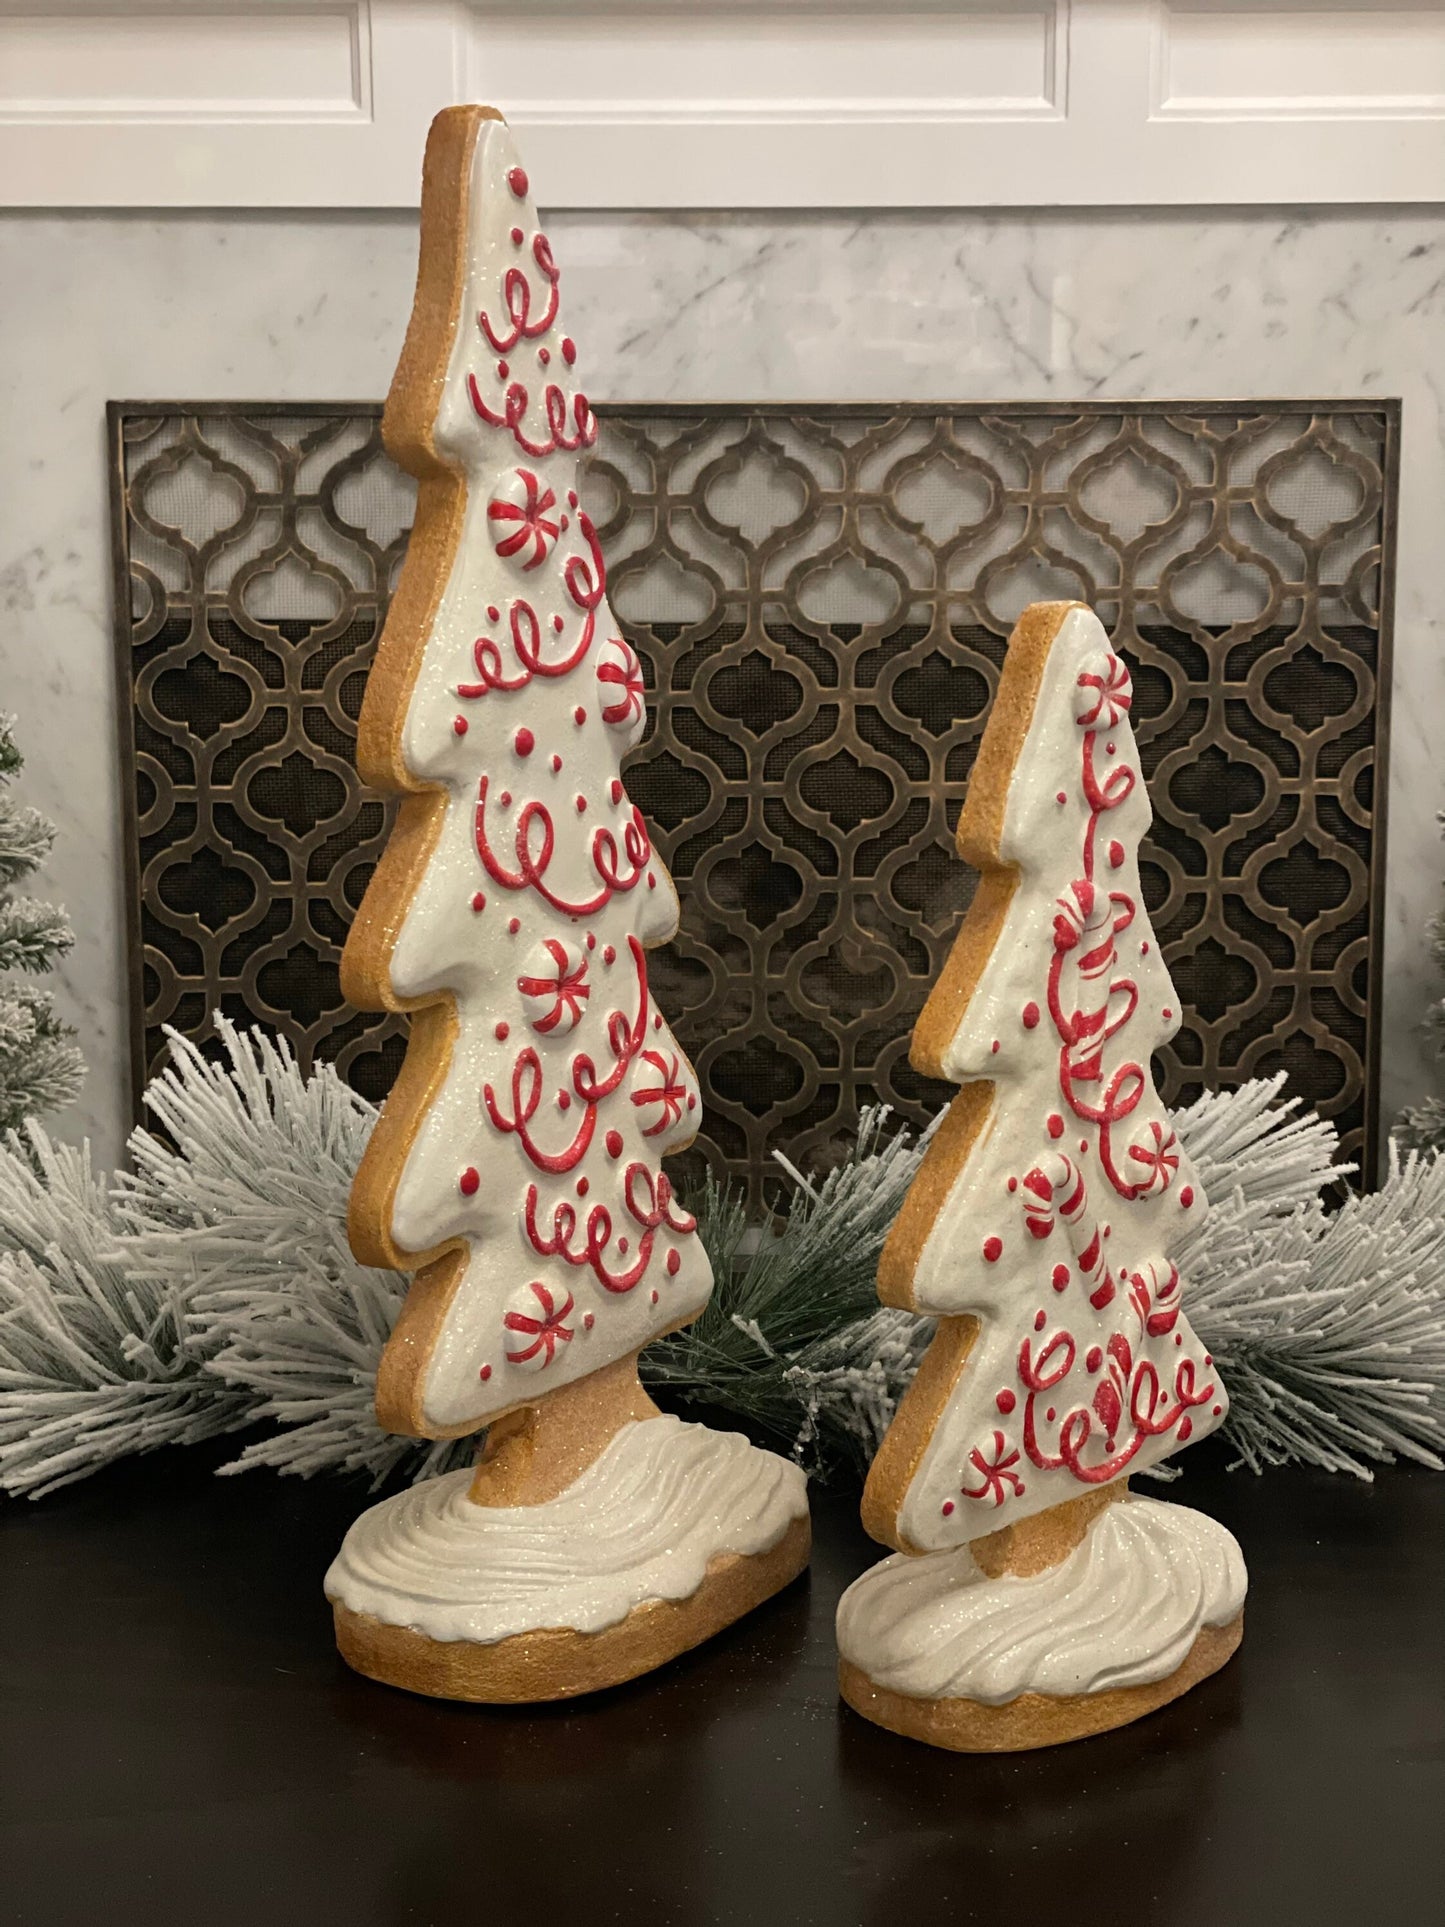 20.25" and 14” Peppermint gingergread trees. Resin. SET of 2.